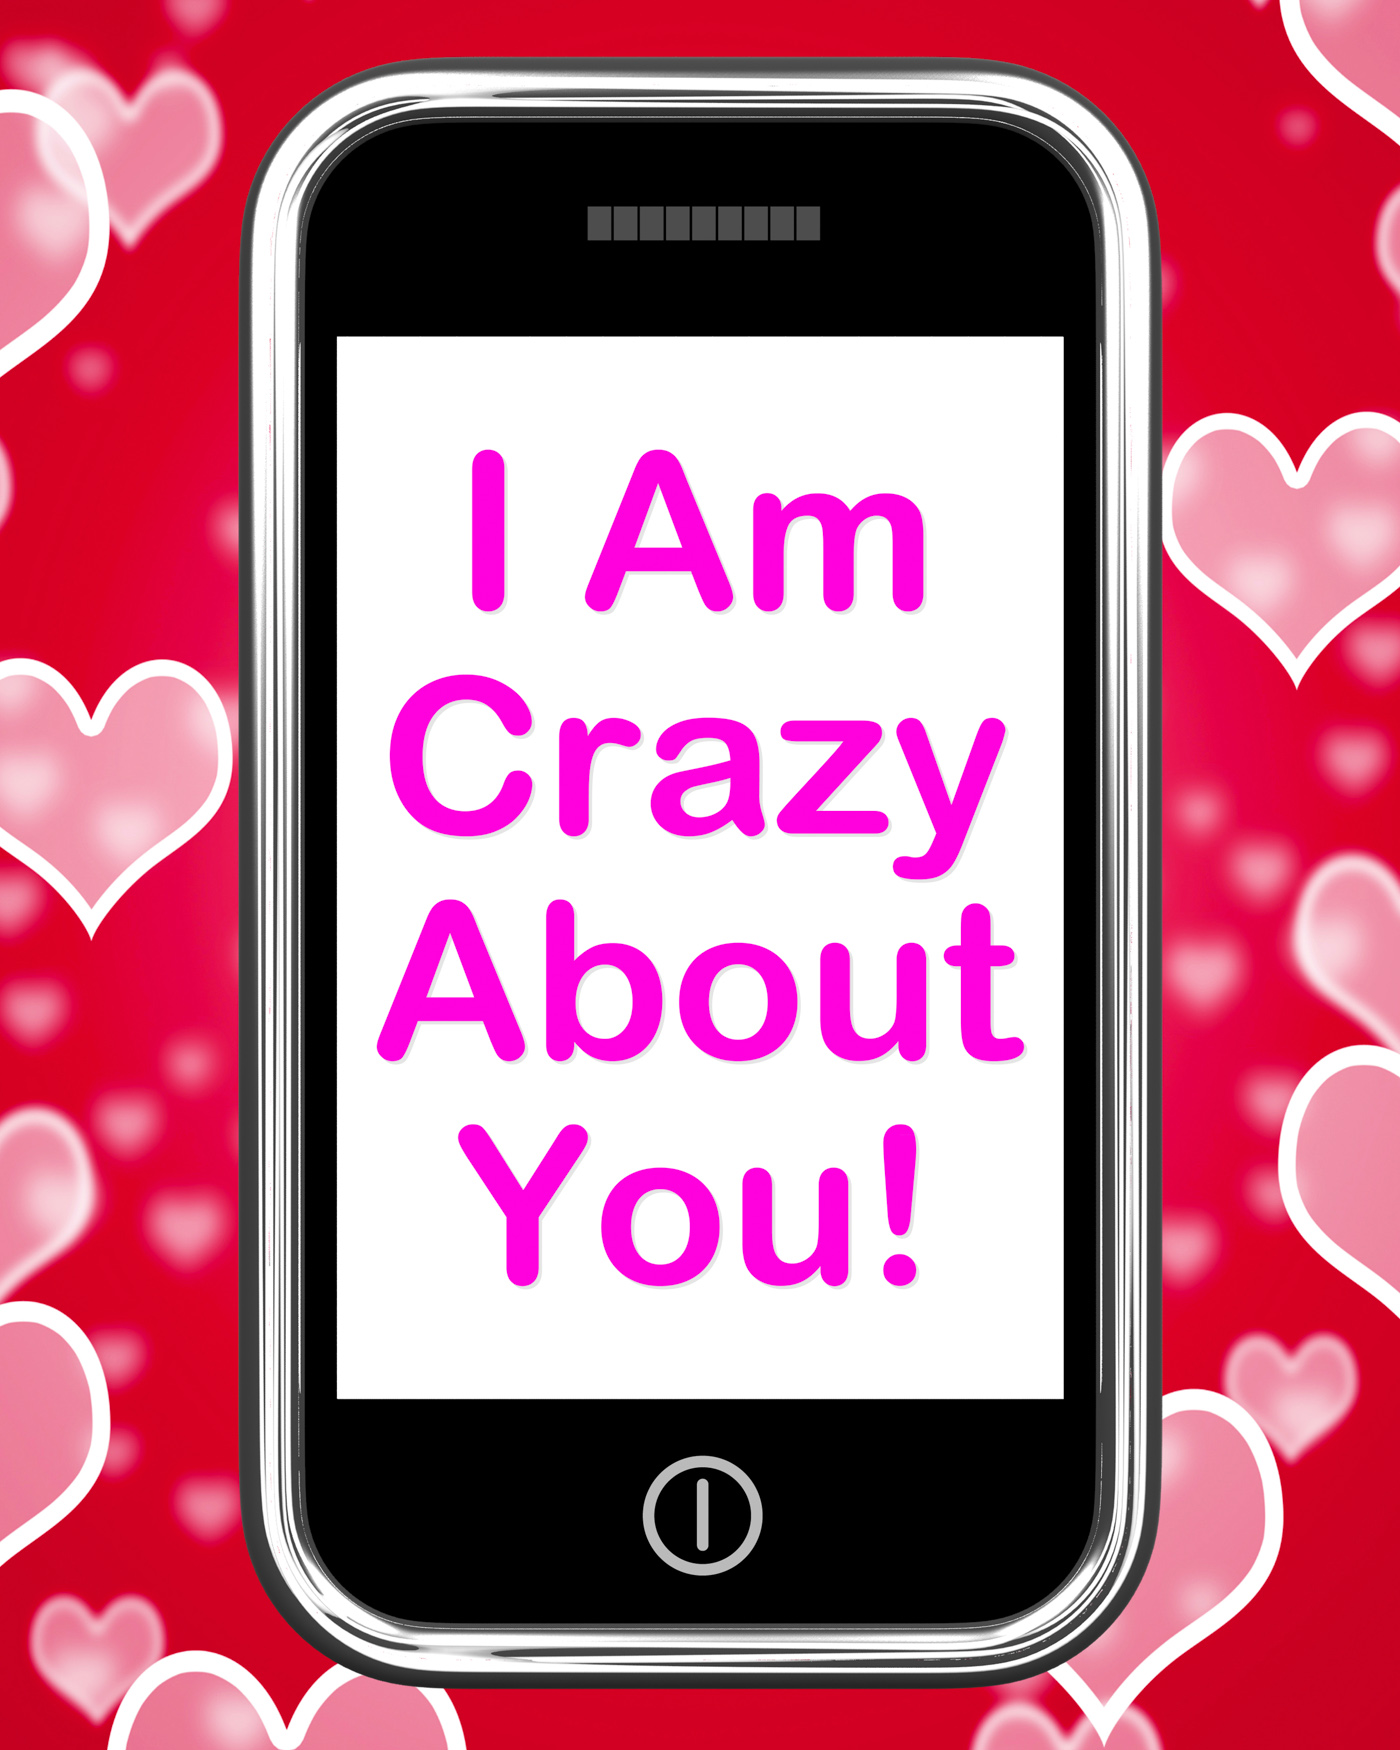 I am crazy about you on phone means love photo